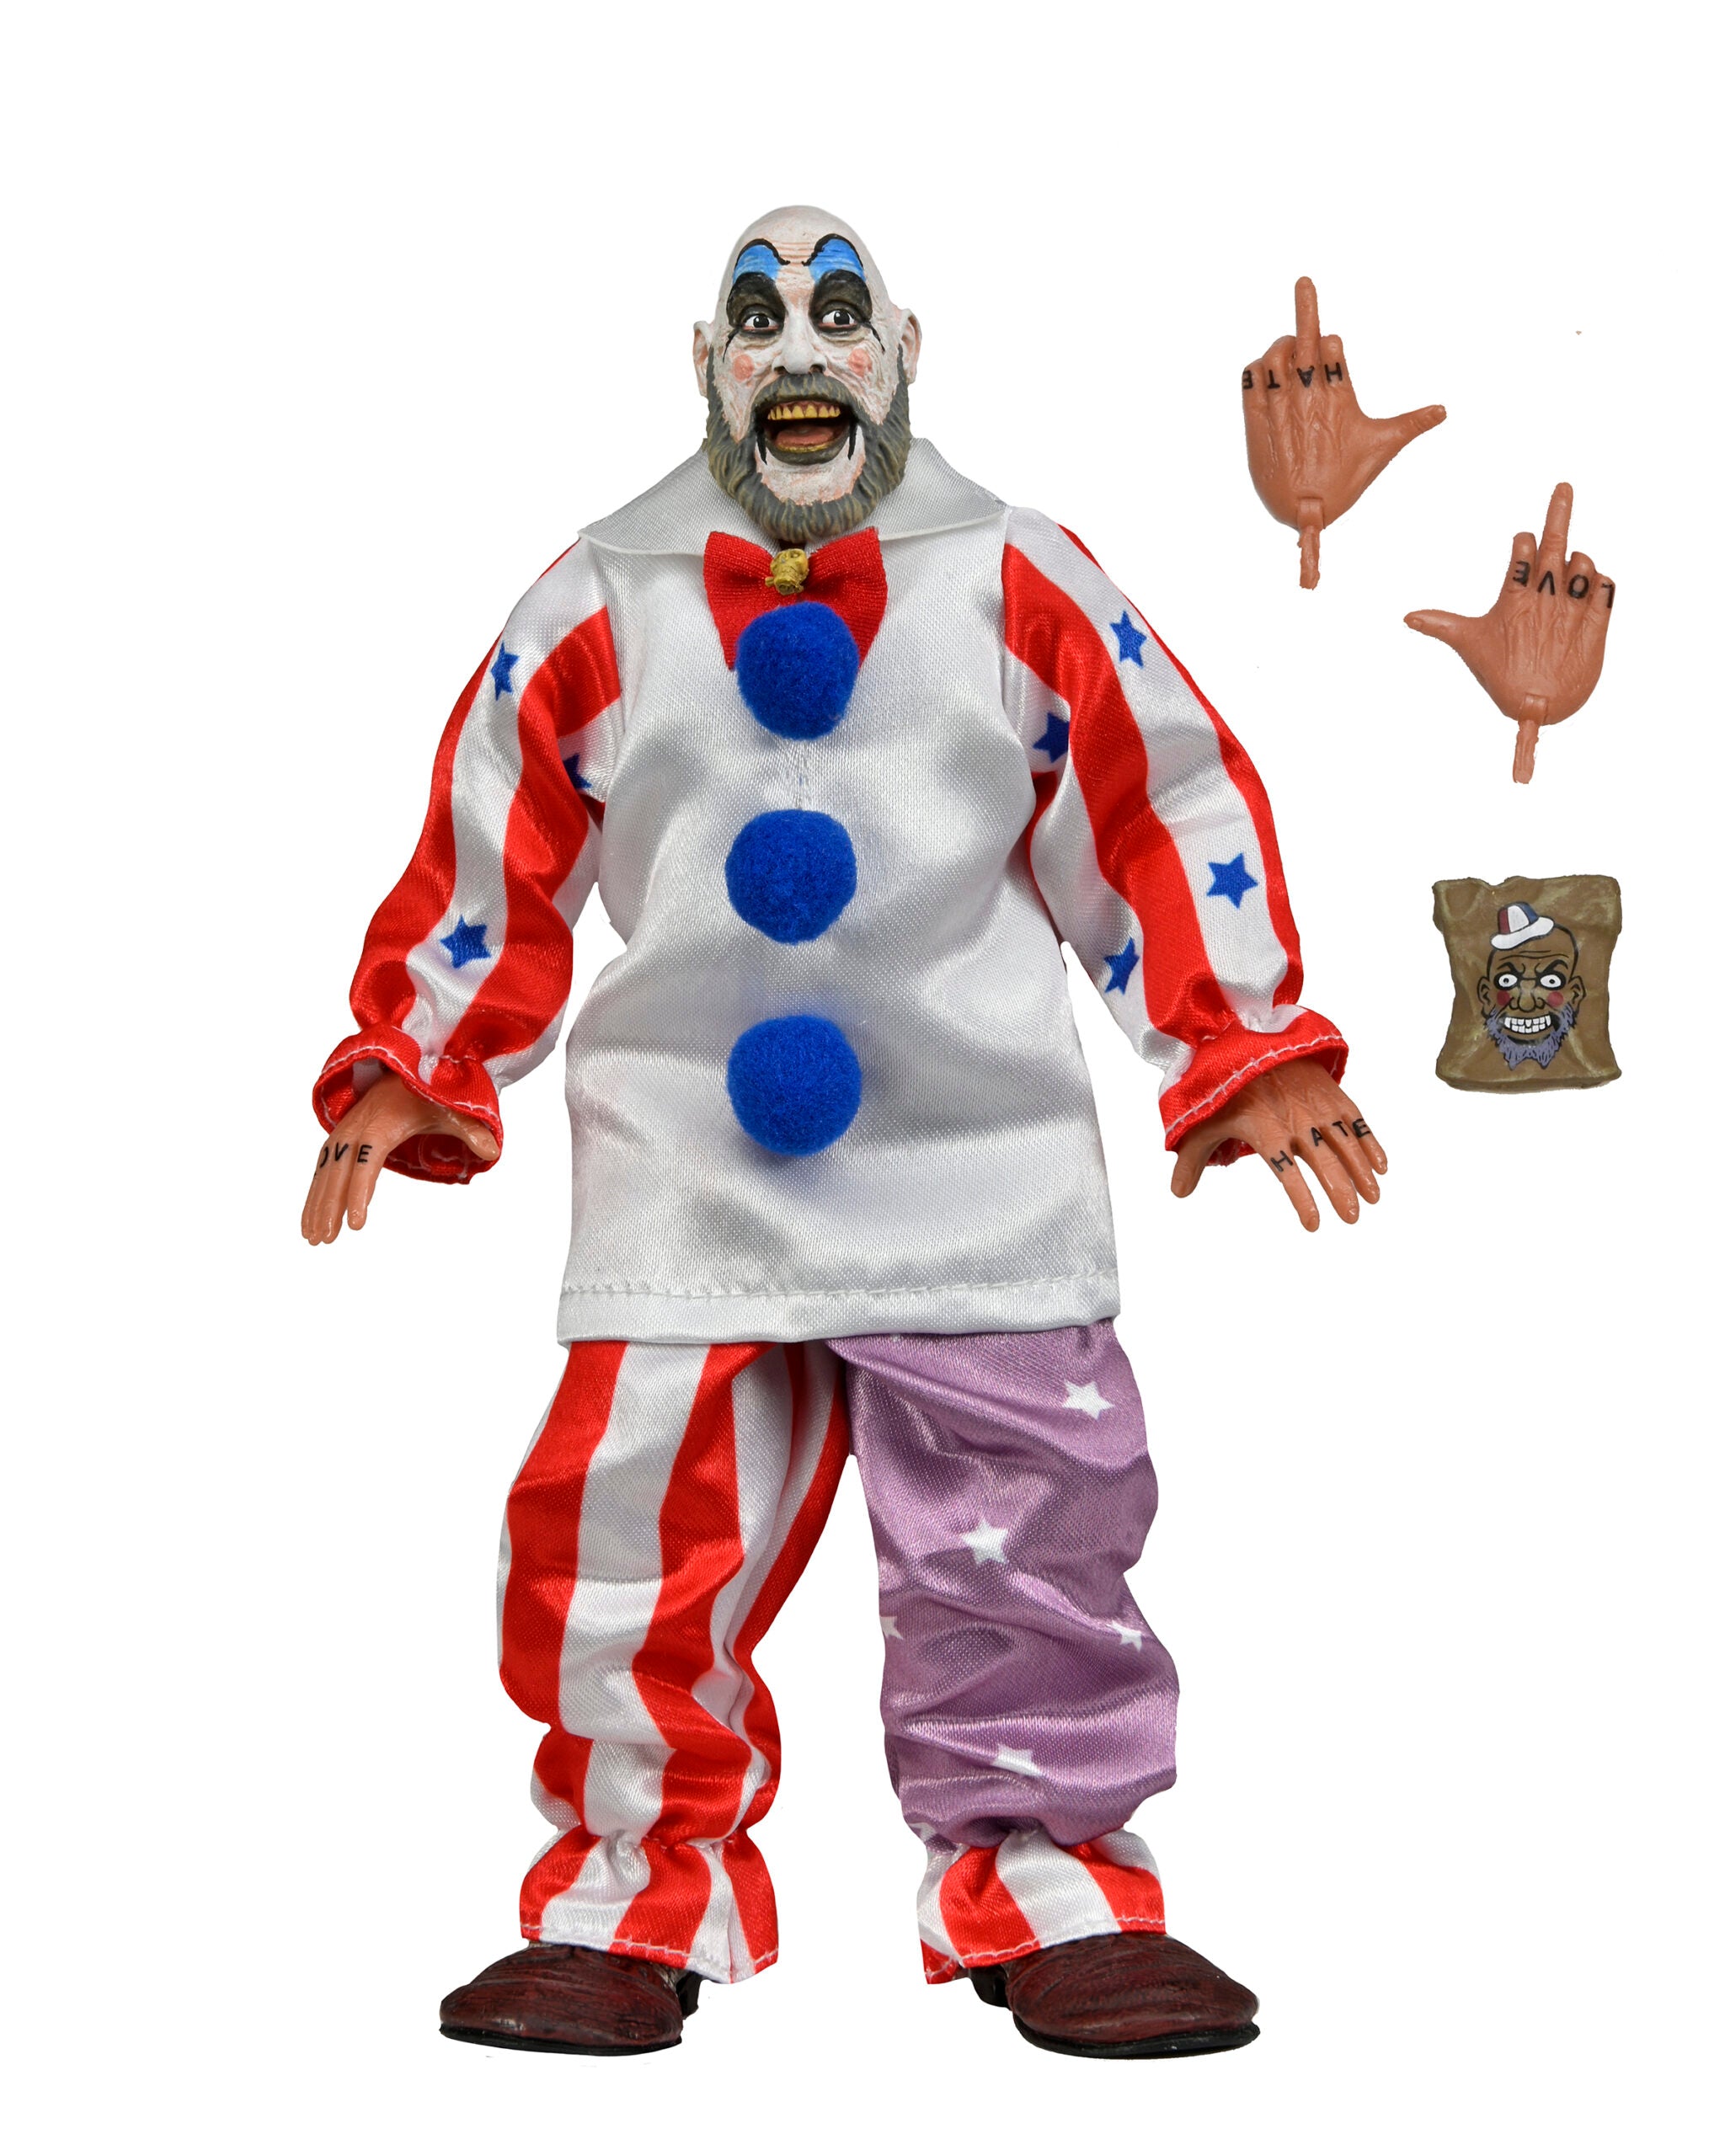 Neca - 8" Clothed Action Figure - House of 1000 Corpses - Captain Spaulding (20th Anniversary) - Marvelous Toys